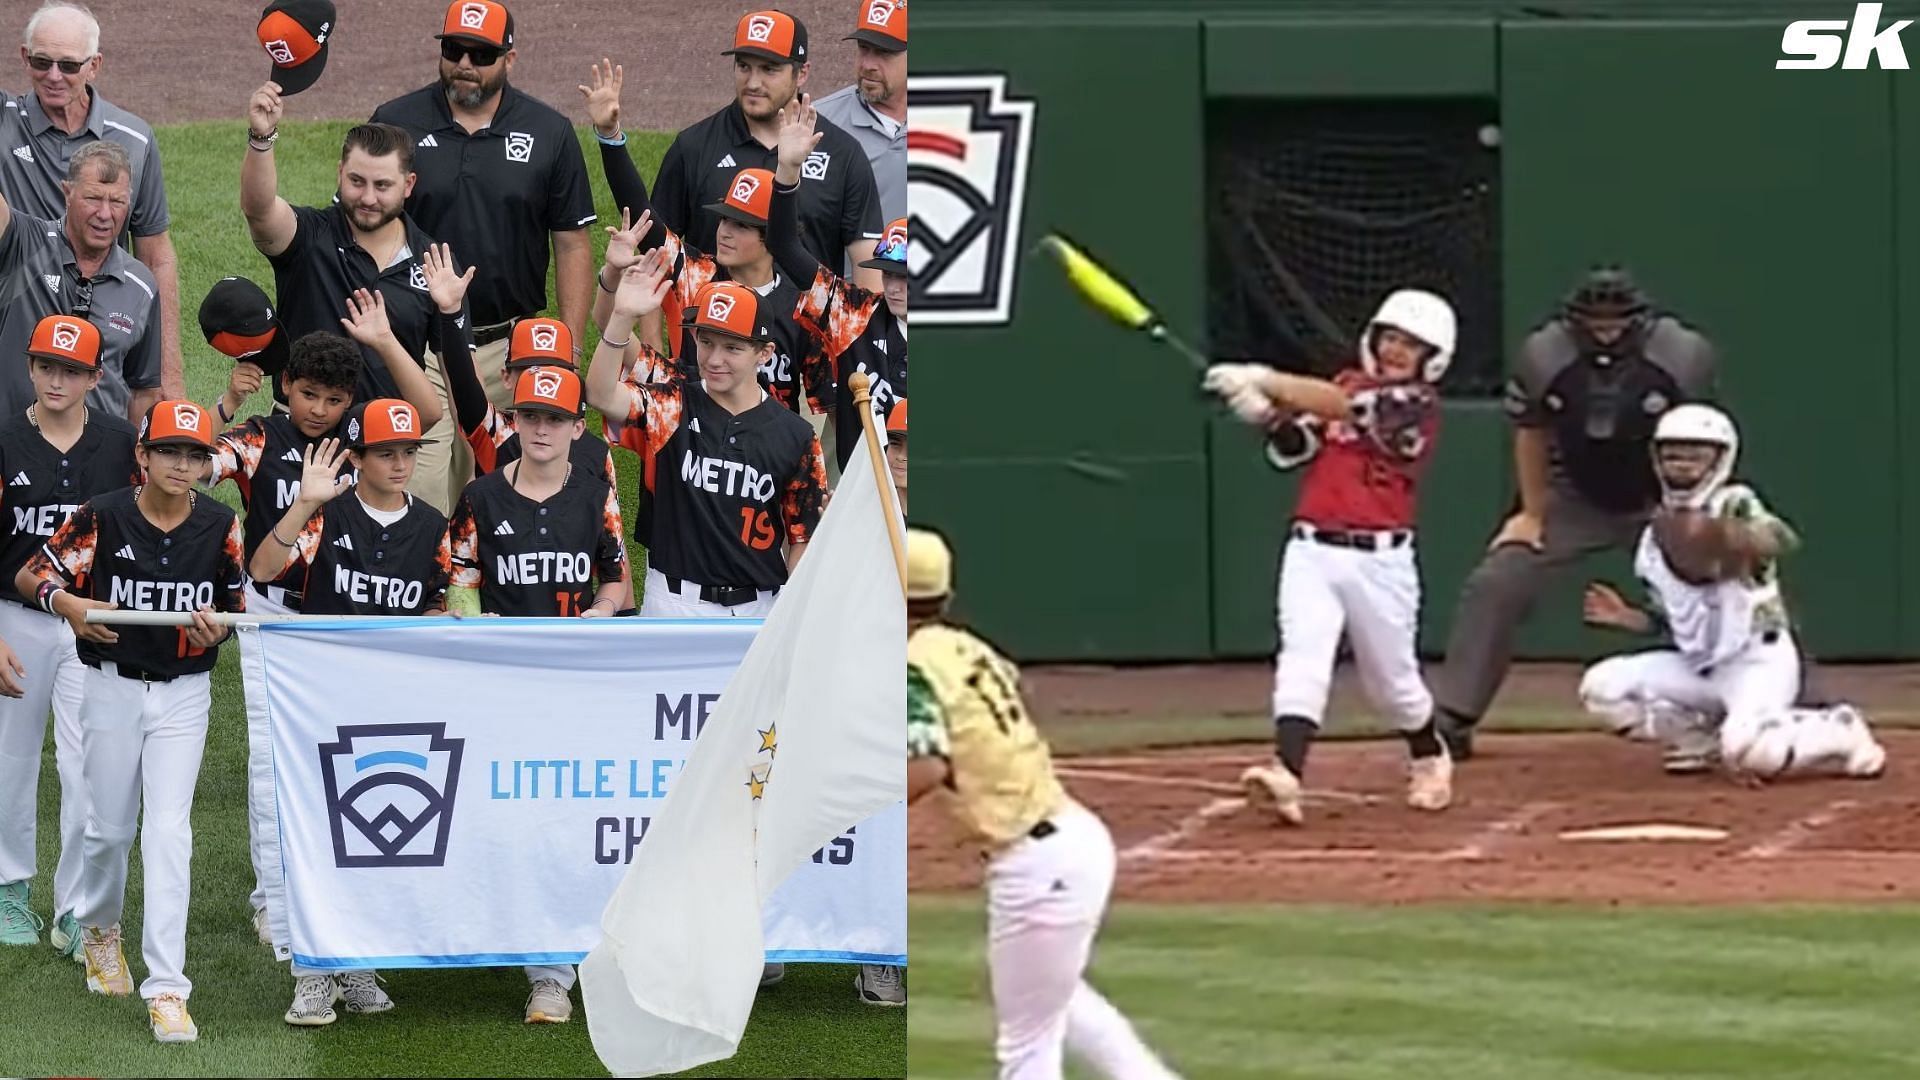 Fans erupt with enthusiasm as young star achieves immaculate Inning at Little League World Series &ndash; demand grows for showdown against Yankees